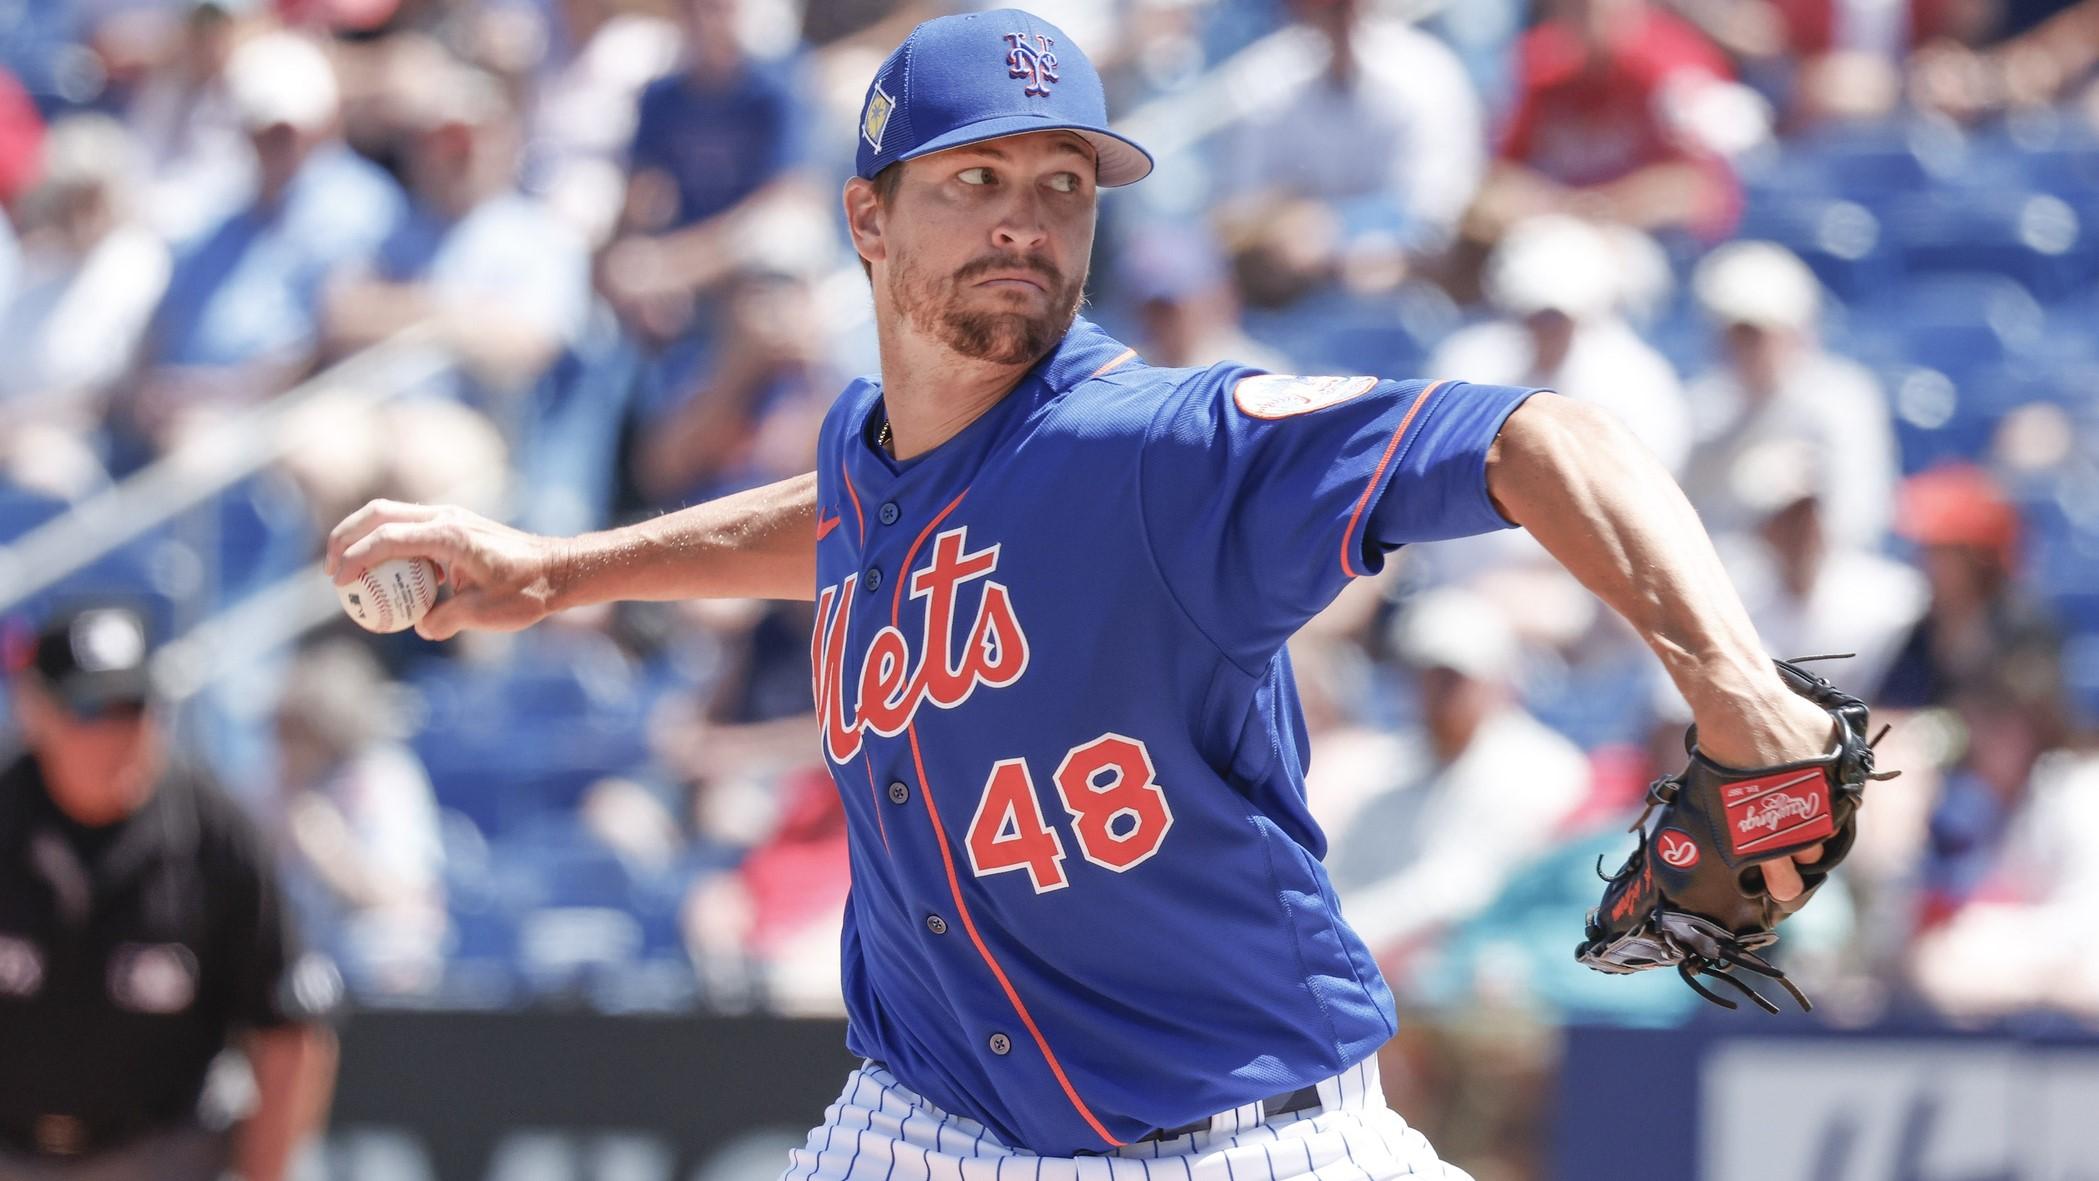 Mar 27, 2022; Port St. Lucie, Florida, USA; New York Mets starting pitcher Jacob deGrom (48) throws a pitch in the first inning during spring training against the St. Louis Cardinals at Clover Park. / Reinhold Matay-USA TODAY Sports